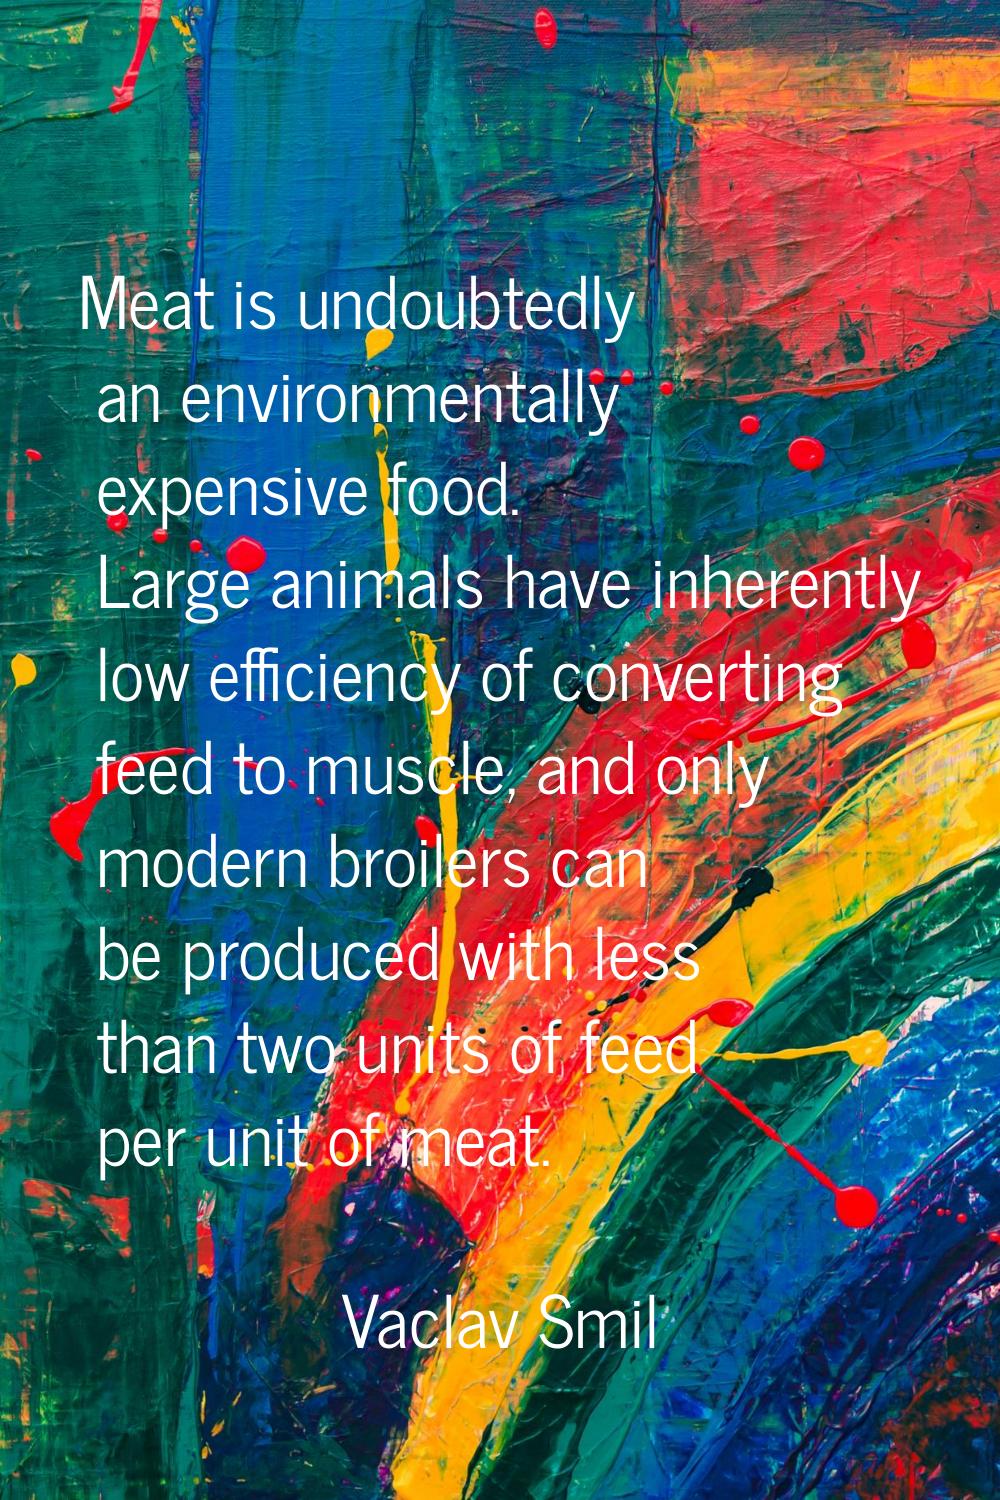 Meat is undoubtedly an environmentally expensive food. Large animals have inherently low efficiency